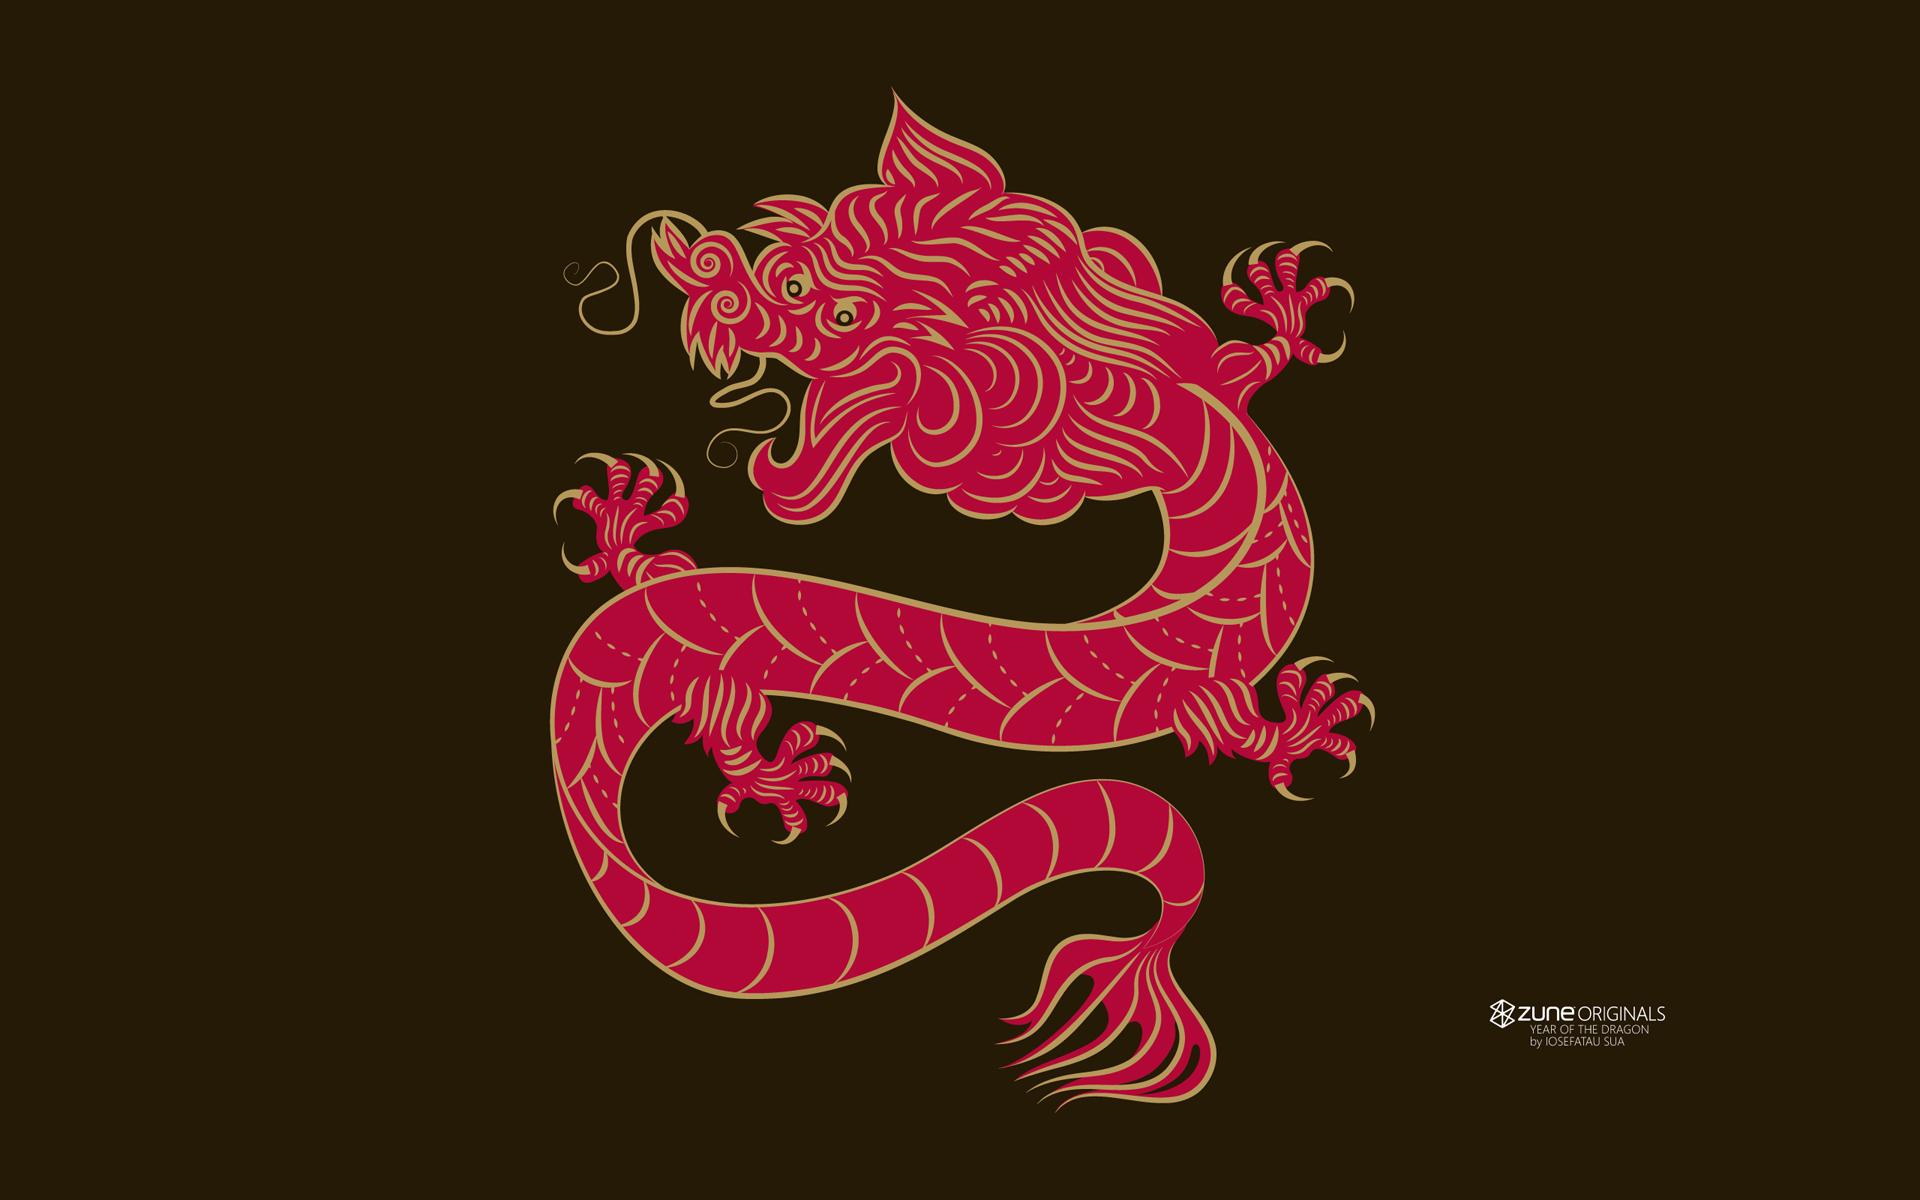 products, zune, dragon, year of the dragon, zodiac High Definition image